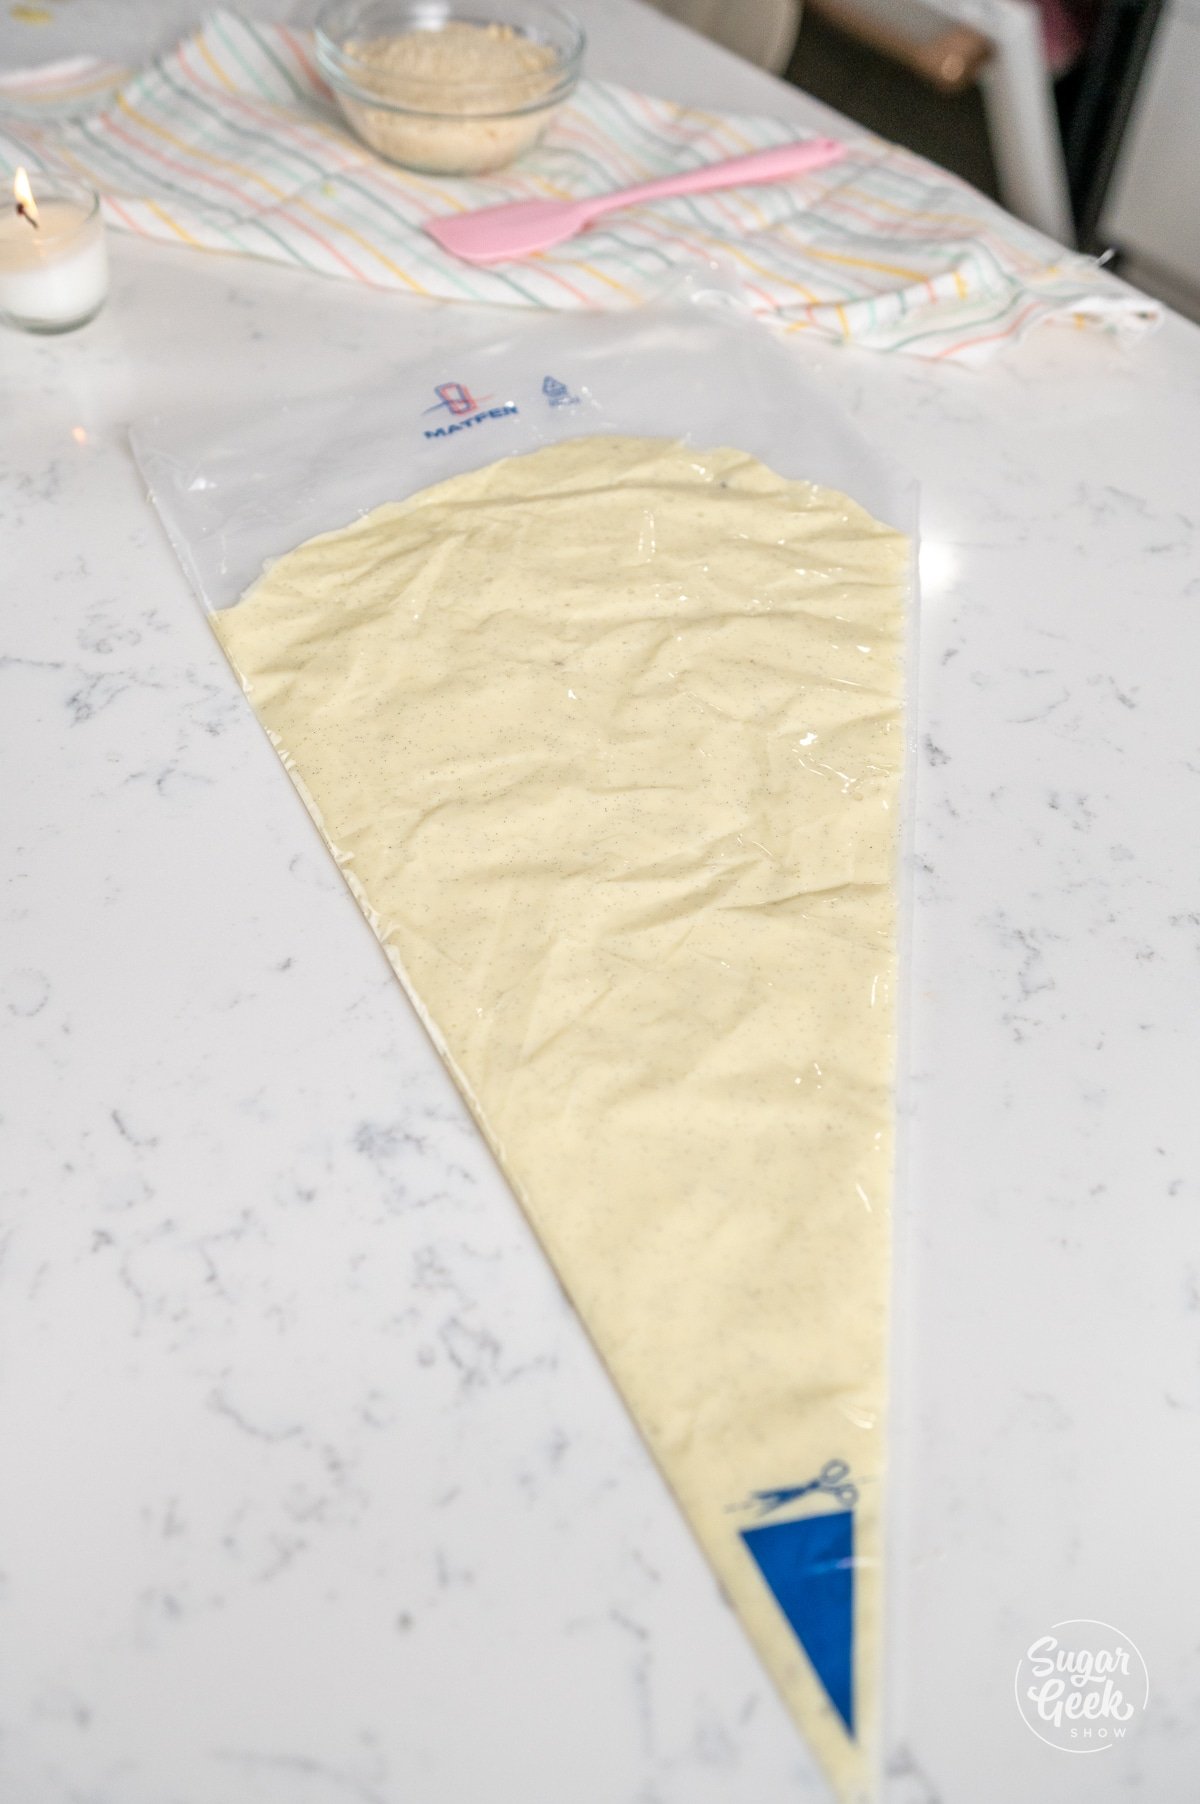 pastry bag of white chocolate ganache flat on a table